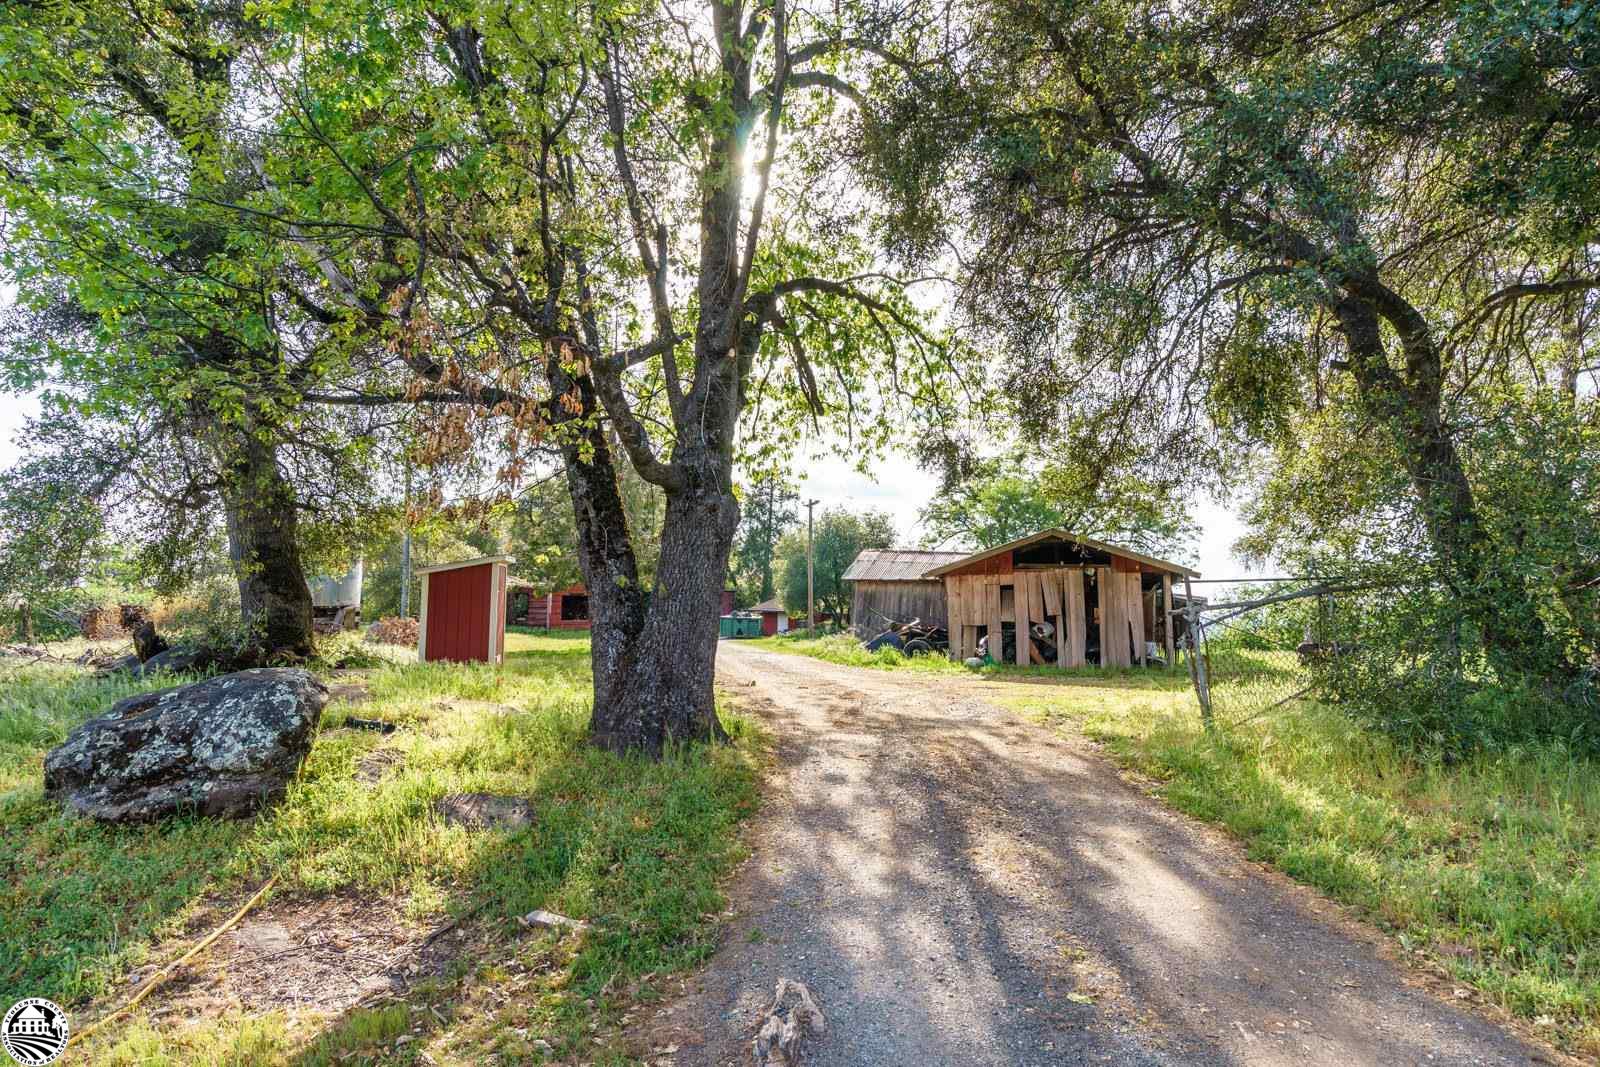 Investors take a look! Priced to sell project home on nearly 7 1/2 total acres with two parcels (separate APN's). Adjacent lot is 3.928 acres being sold together with the main lot of 3.5 acres. Build on one and live on the other. Gorgeous views from behind the home on the main lot and privacy as well. Lots of usable outdoor space all within a mile to town yet feel like you're in the country. The home has 5 permitted bedrooms and 2 bathrooms plus bonus areas (don't forget to look downstairs). Great for a remodel/rebuild with septic, electric and well with a new pump ready to go! Several outbuildings including a one car garage and workshop space. Bring your ideas and create something wonderful here. As is sale. Call your favorite agent today and come see in person.